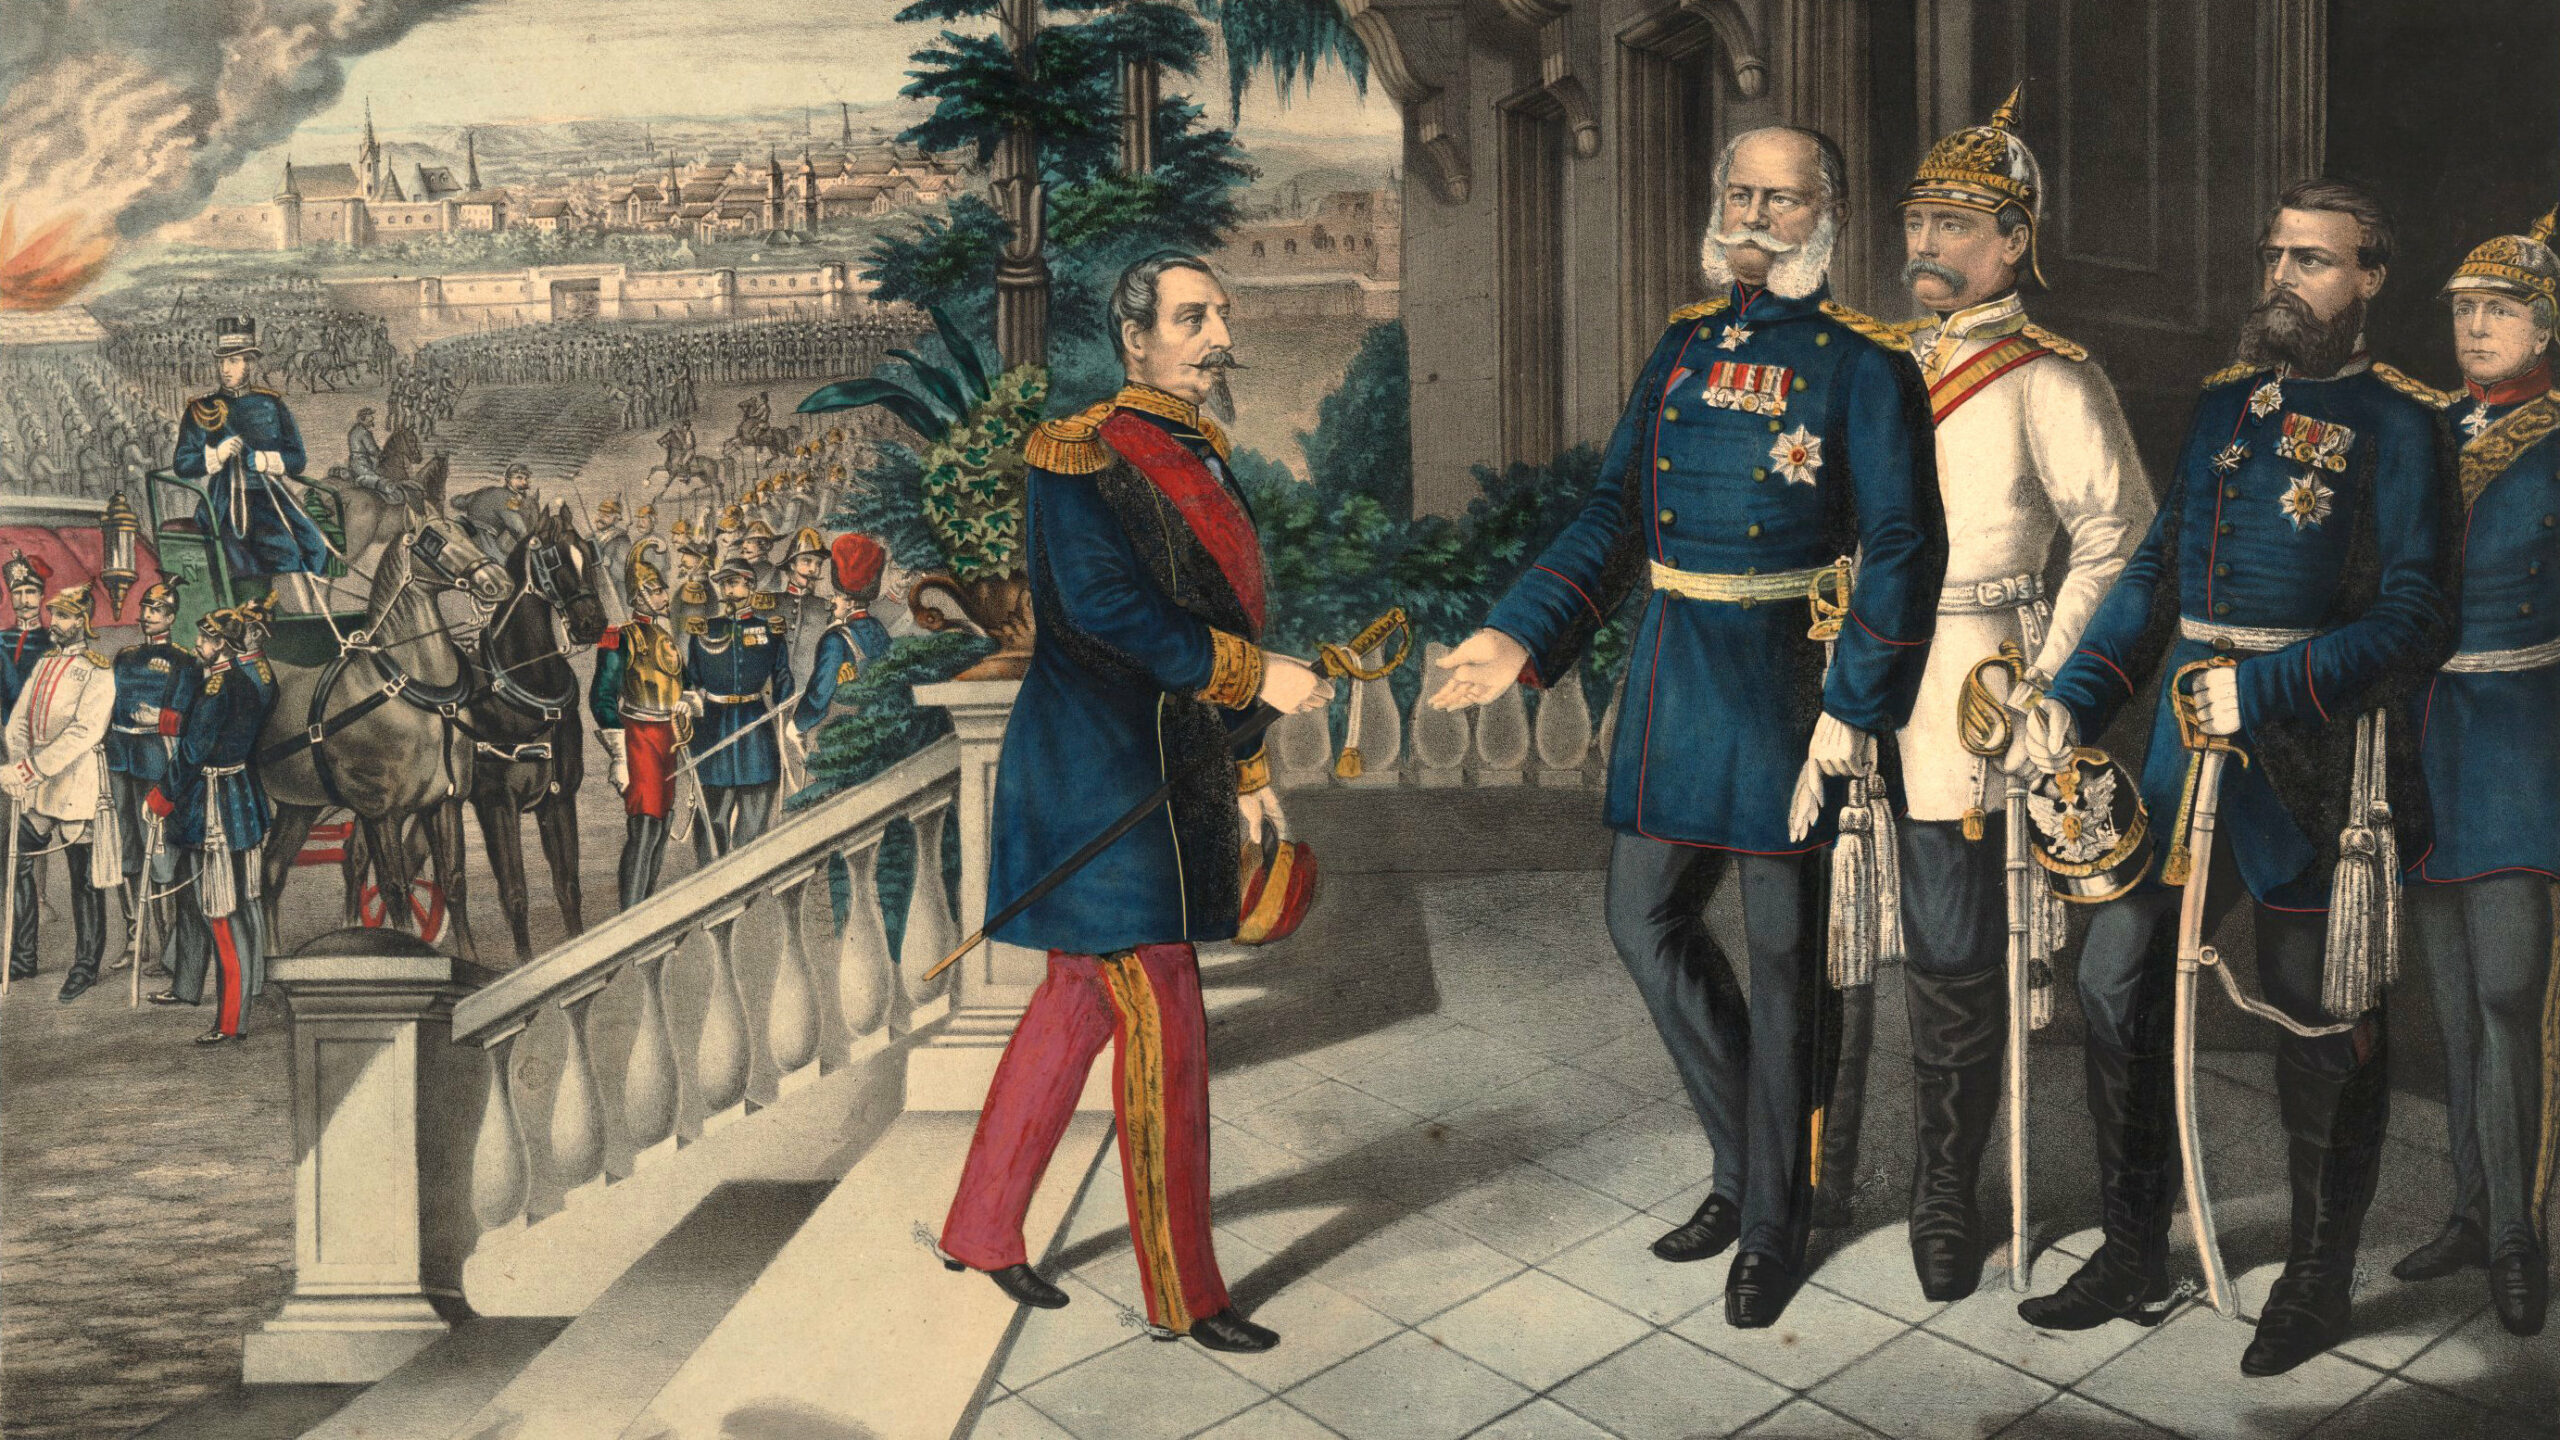 French Emperor Napoleon III, left, surrenders to Prussian King Wilhelm I after the Battle of Sedan in September 1870. Prussian chancellor Otto von Bismarck, in white, looks on.